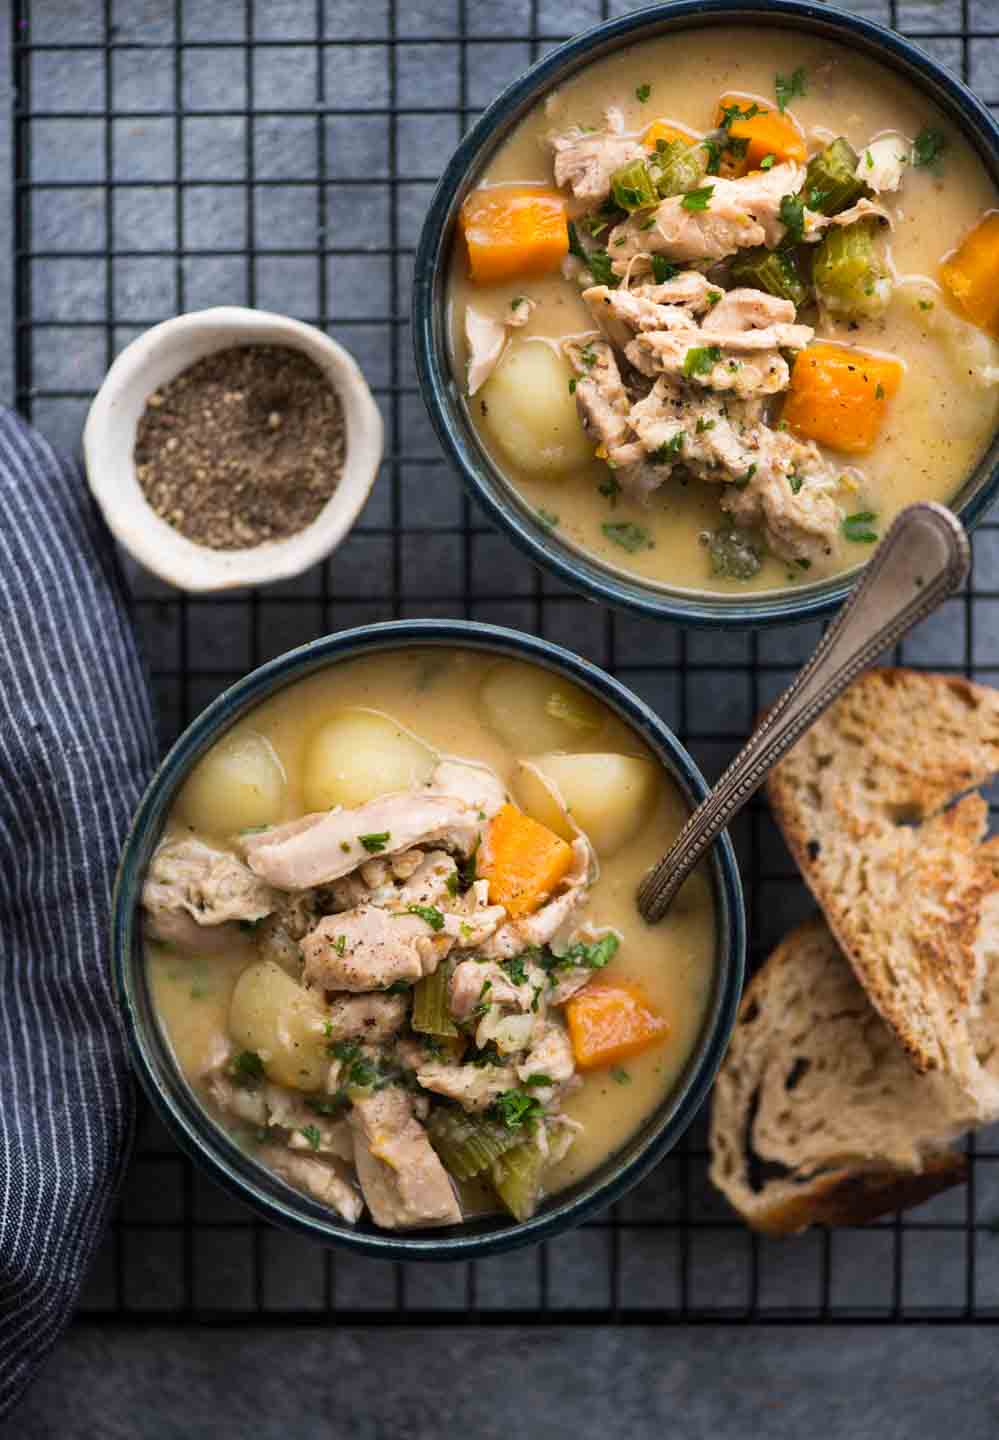 Homemade Crockpot Chicken Stew is loaded with vegetables and is gluten-free. Coconut milk makes it thick and creamy. It is the only comfort food you would need to cosy up to on a cold winter night.